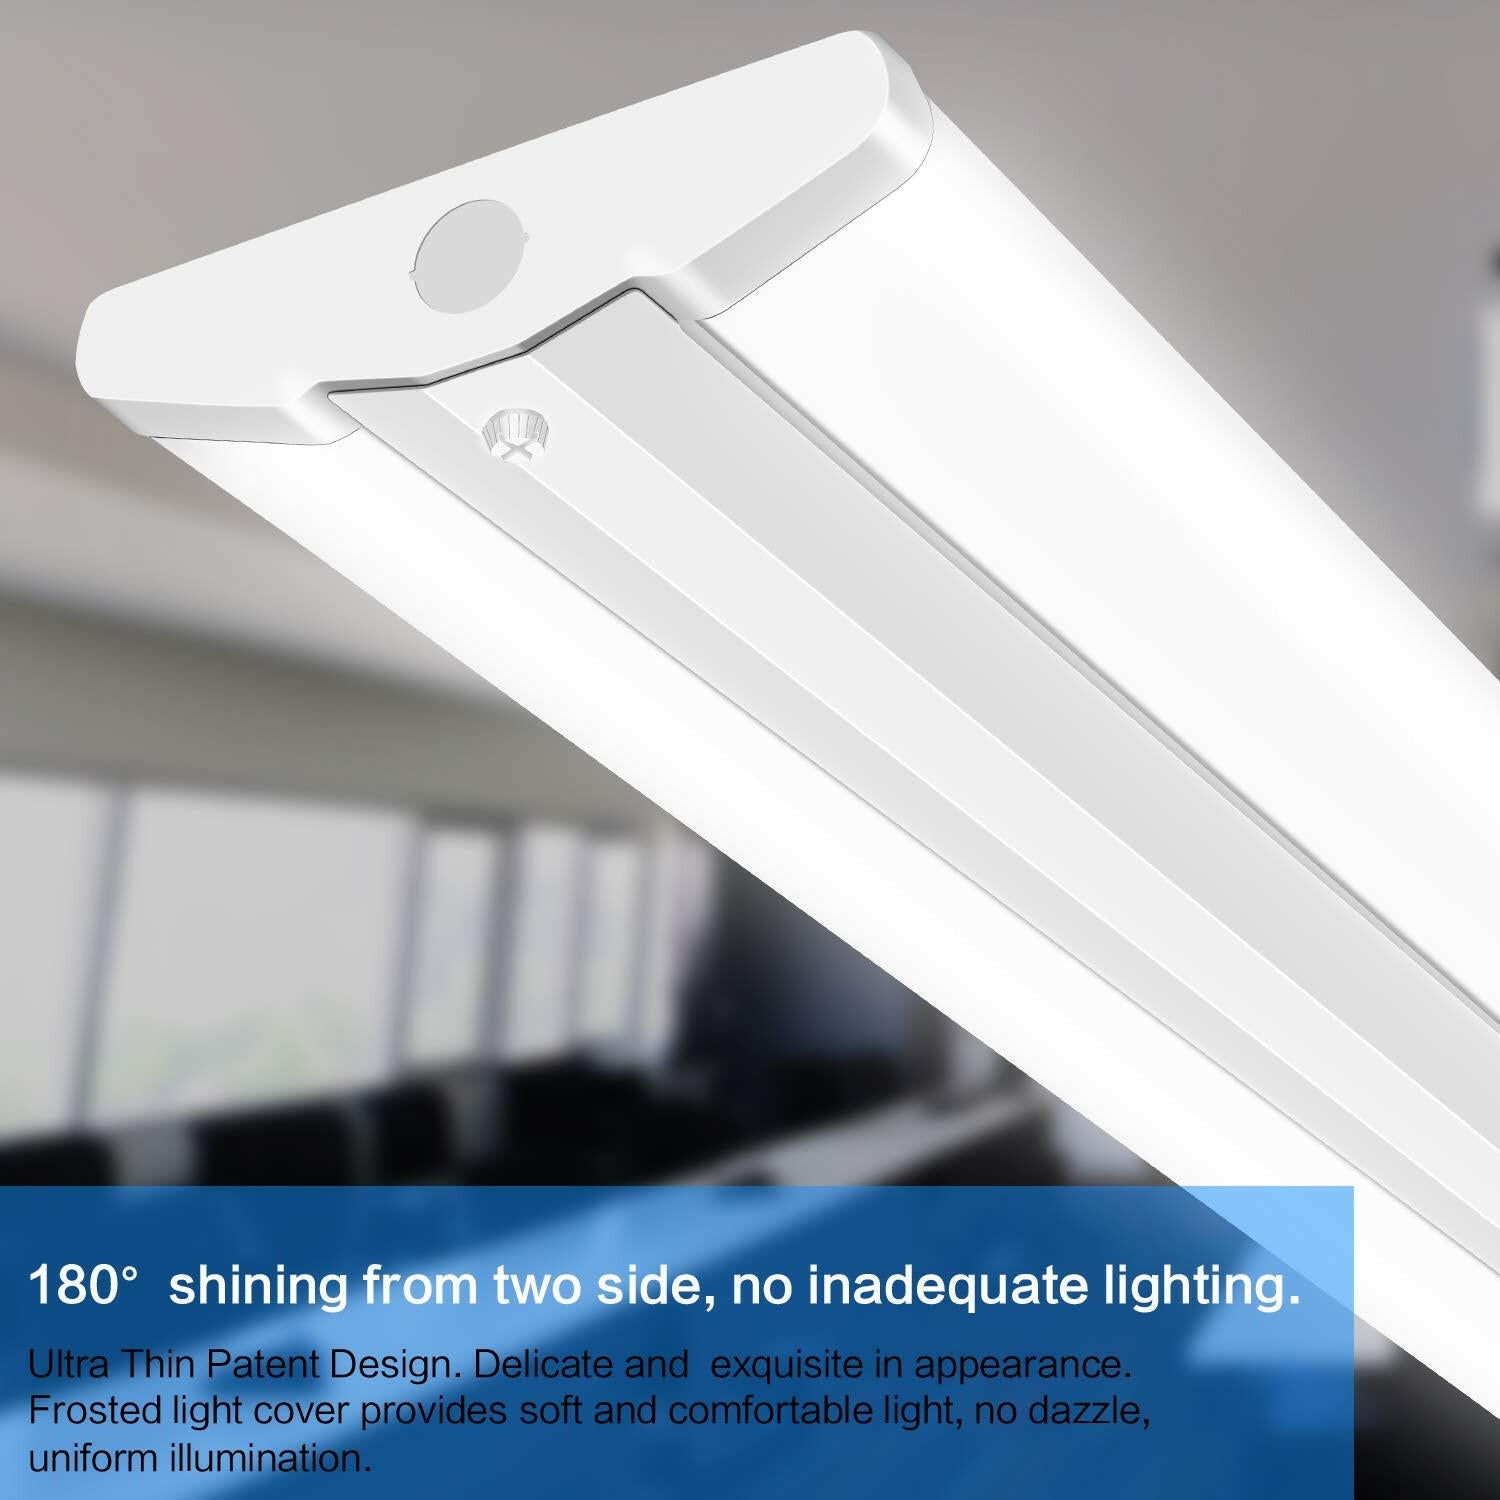 Super-Thin LED Lamp buy now